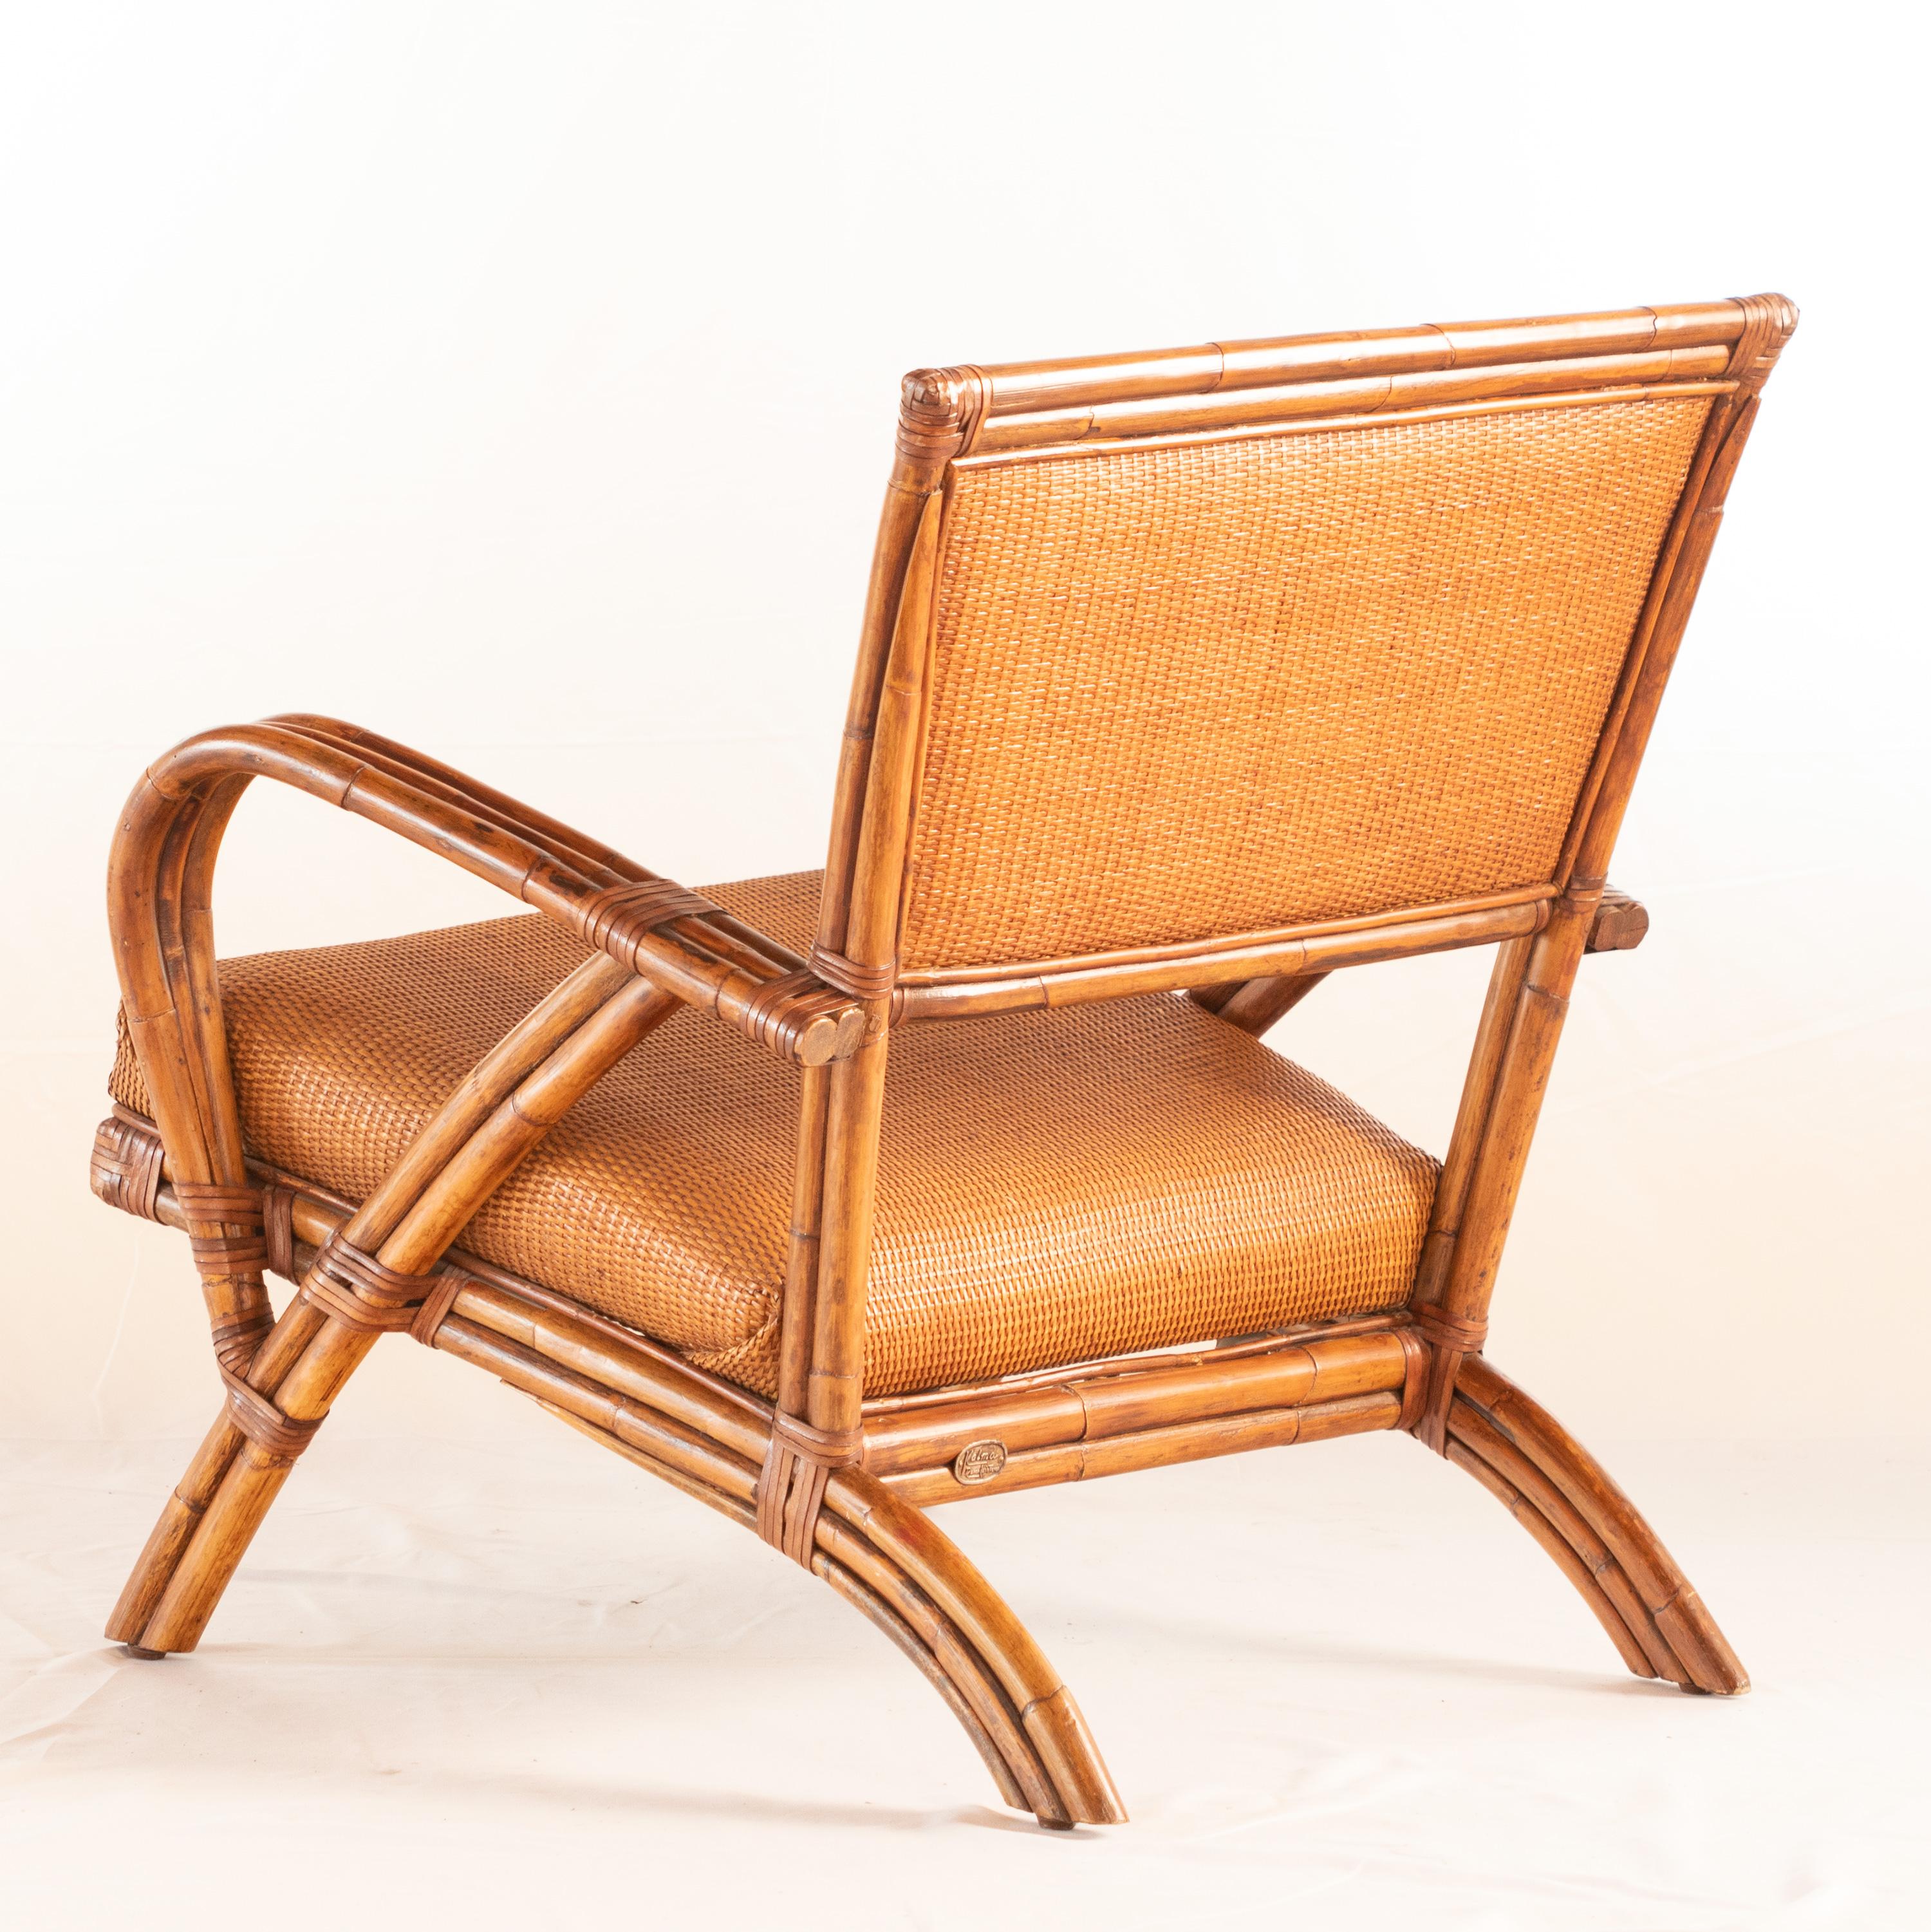 Rattan Split Chair Wood Confortable Modern Asian Modern Kalma Furniture In Excellent Condition For Sale In Milano, IT